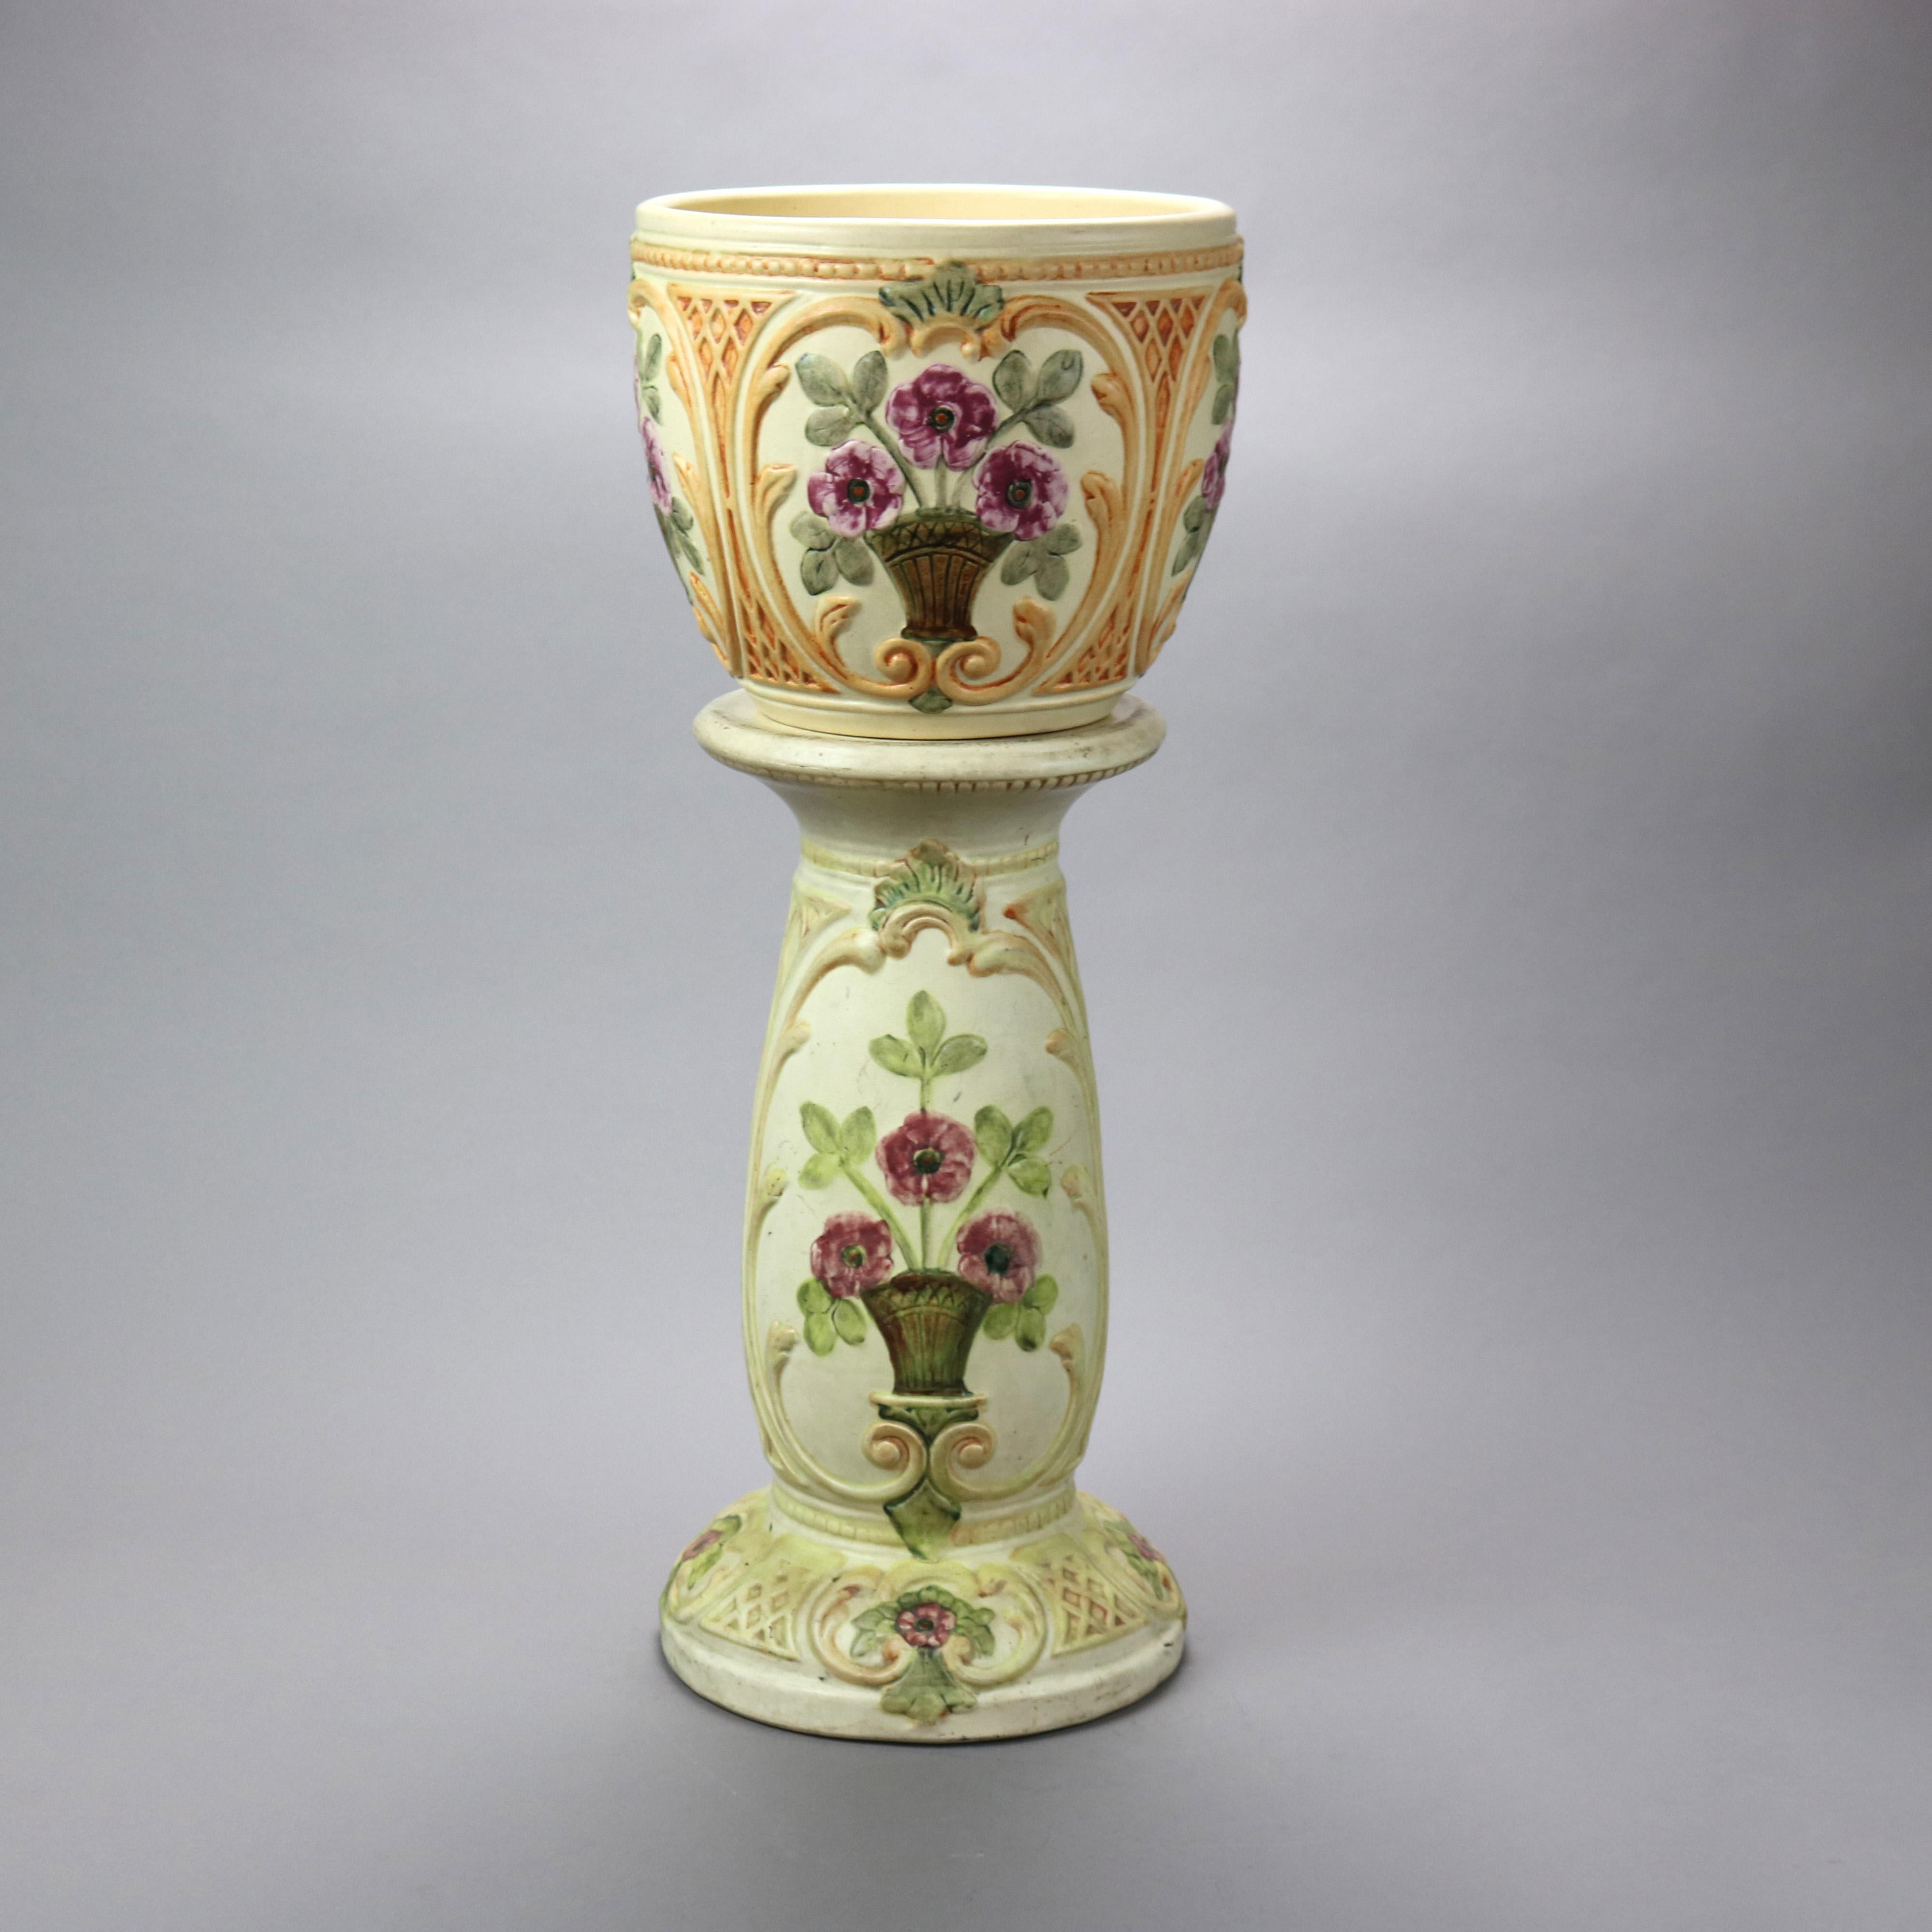 An antique jardiniere and pedestal sert by Weller offers art pottery consstruction with scroll, foliate and lattice decoration having reserves of potted flowers, signed on base as photographed, c1930

Measures - Overall 27.75'' H x 11.25'' W x